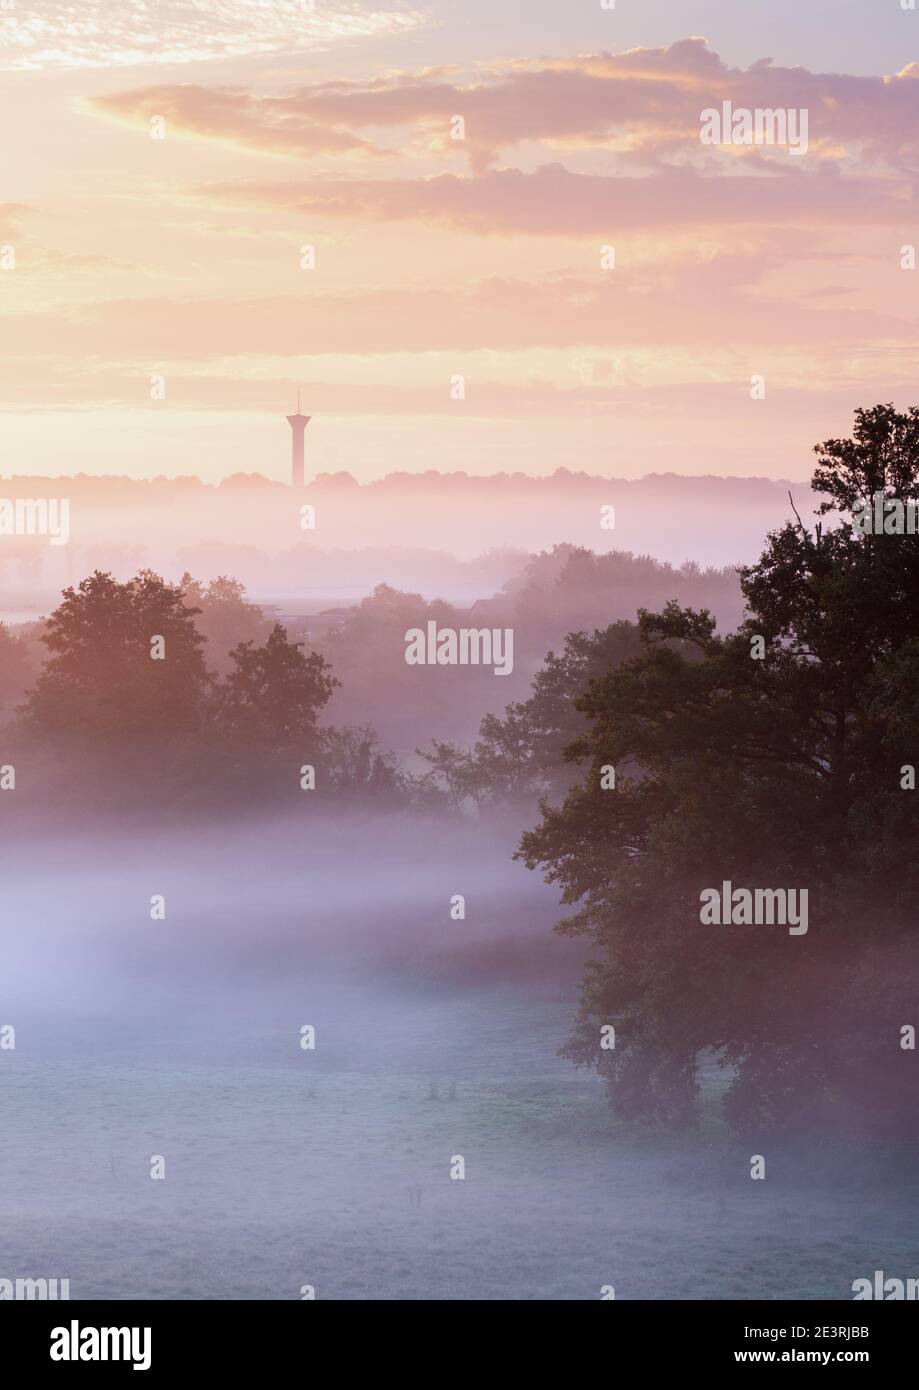 A pastel sunrise in the Poitou-Charentes countryside near Confolens creates beautiful layers in the misty landscape with a water tower on the horizon. Stock Photo